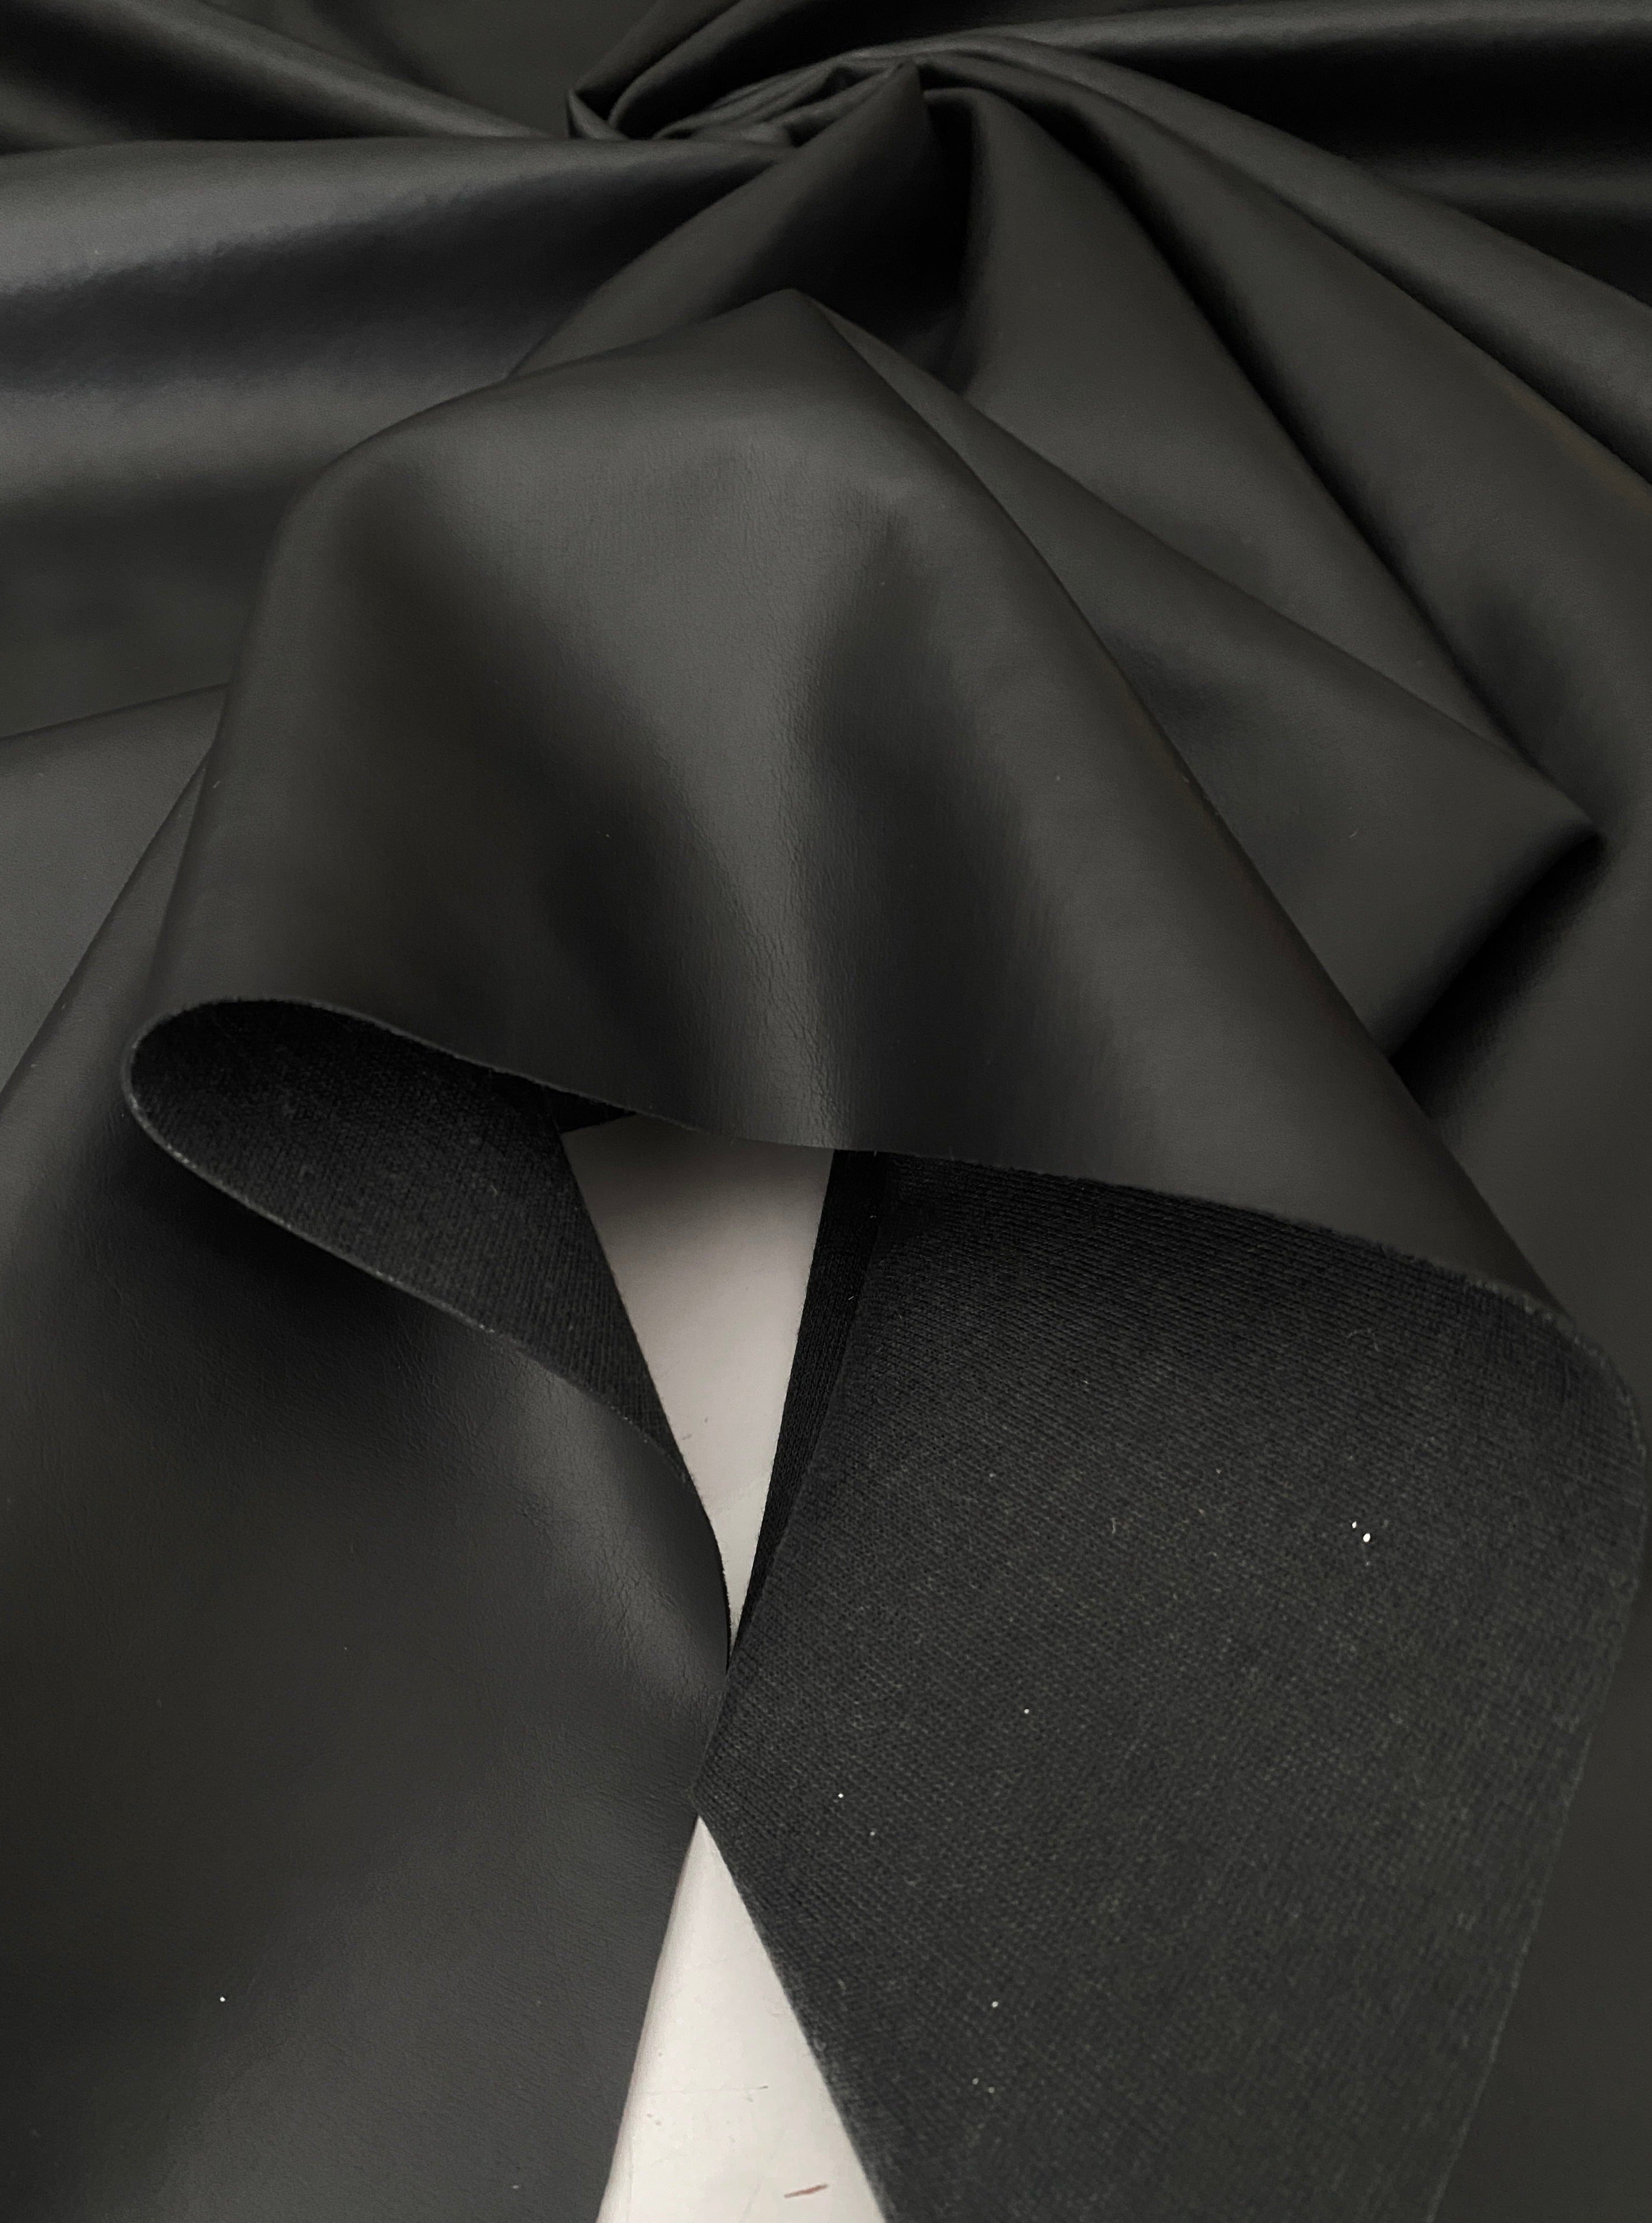 black upholstery vinyl, black vinyl, black faux leather, black leather, charcoal color, vinyl store usa, kiki textiles, leather on discount, vinyl fabric for pants, Black Matte Smooth Vinyl,  vinyl for Furniture,  vinyl for Jacket, Faux Leather by the yard, vinyl on discount, vinyl on sale